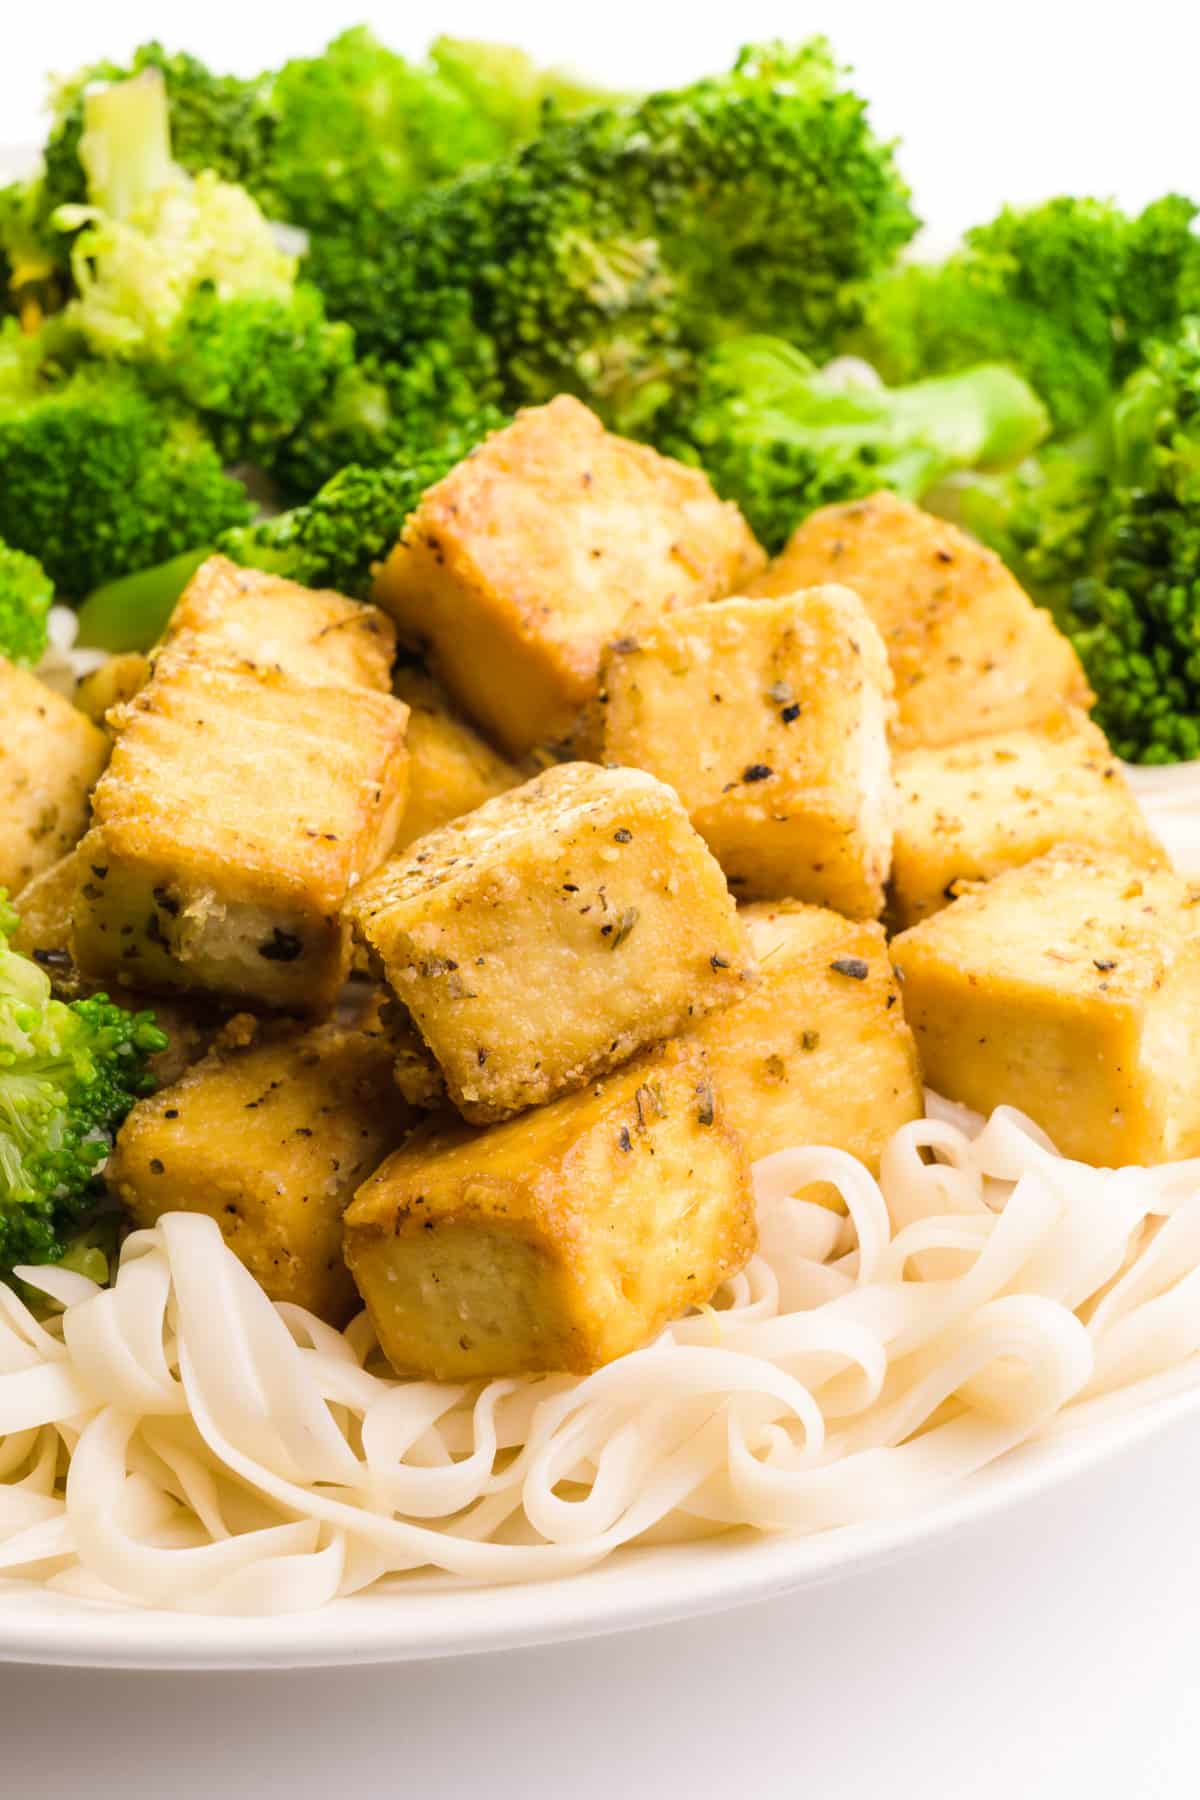 Savory baked tofu sits on a plate with noodles and steamed broccoli.